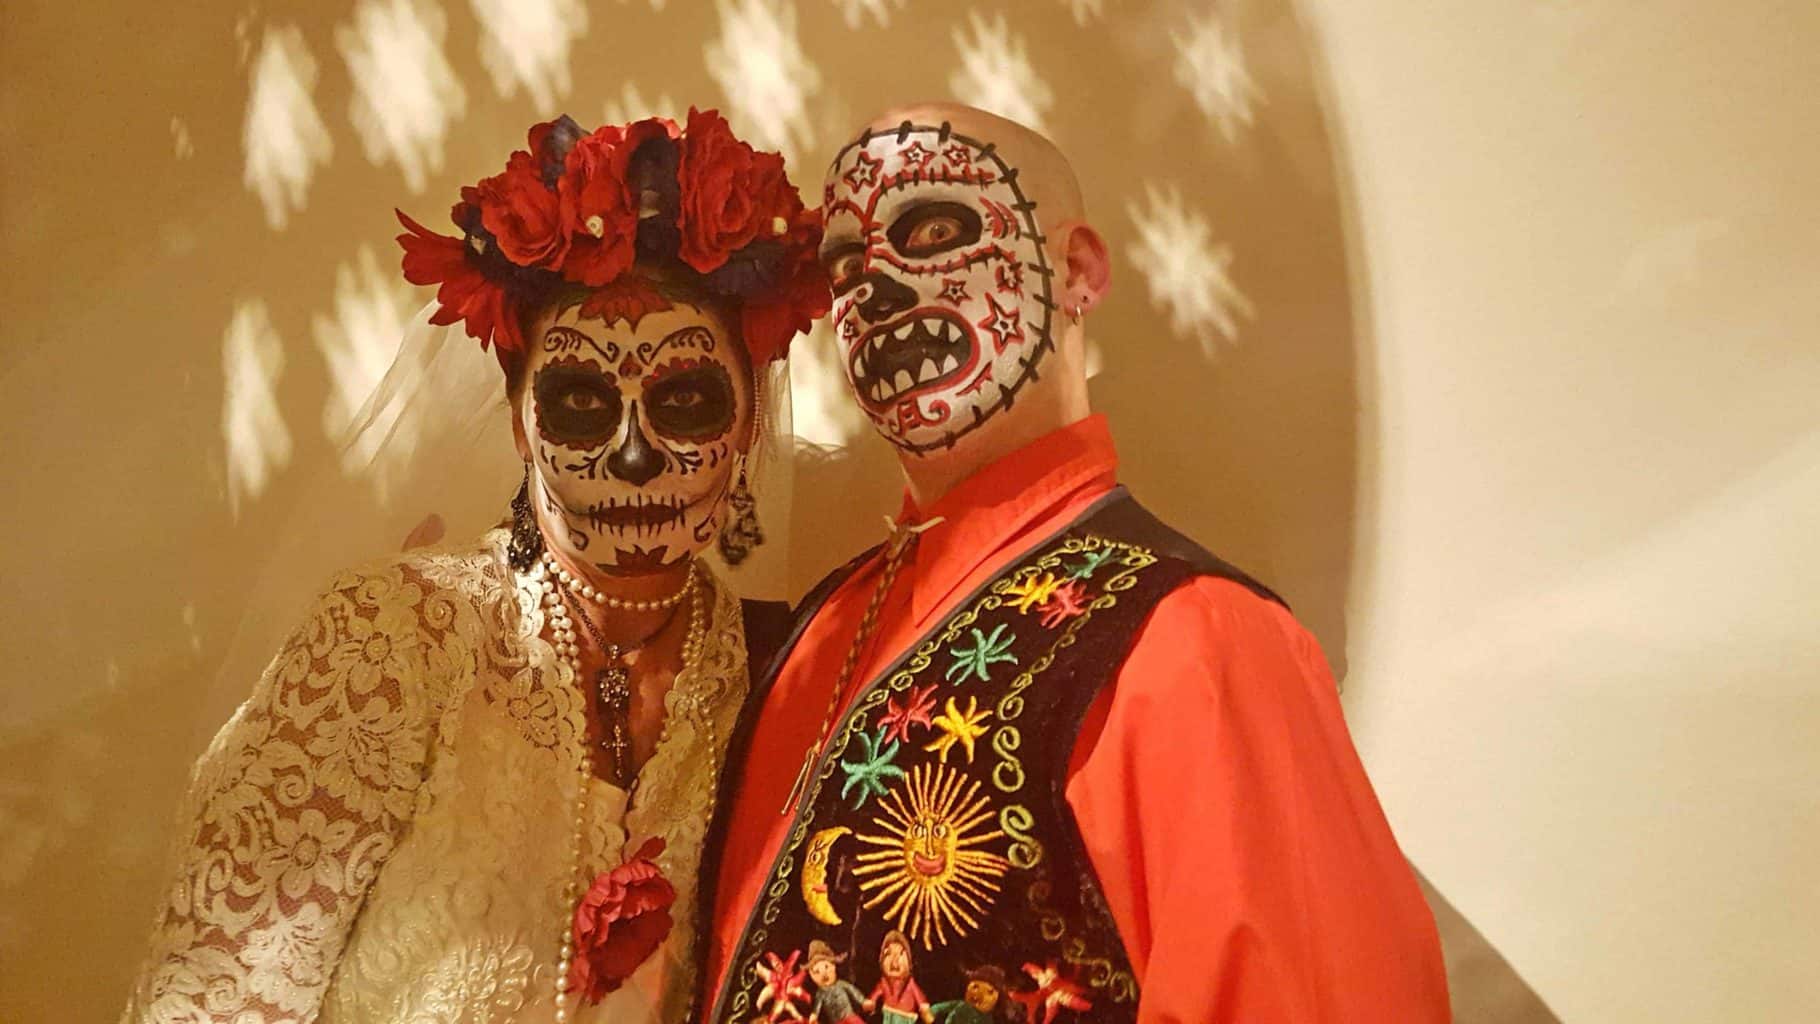 Man and woman all dressed up for a scary costume